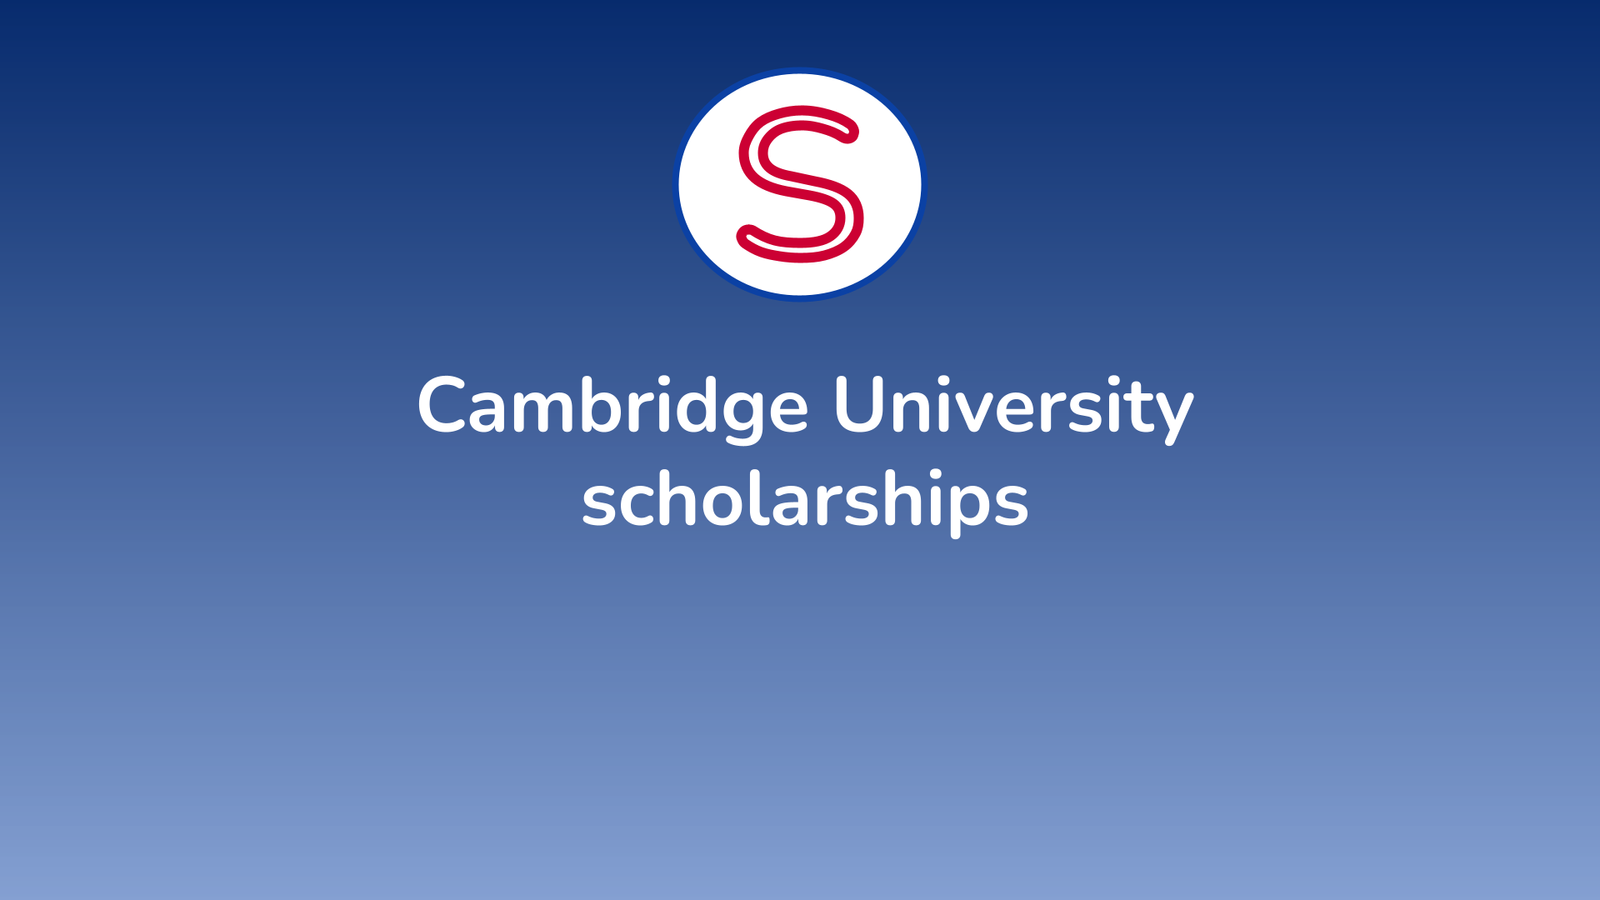 The 485 Cambridge University scholarships for students